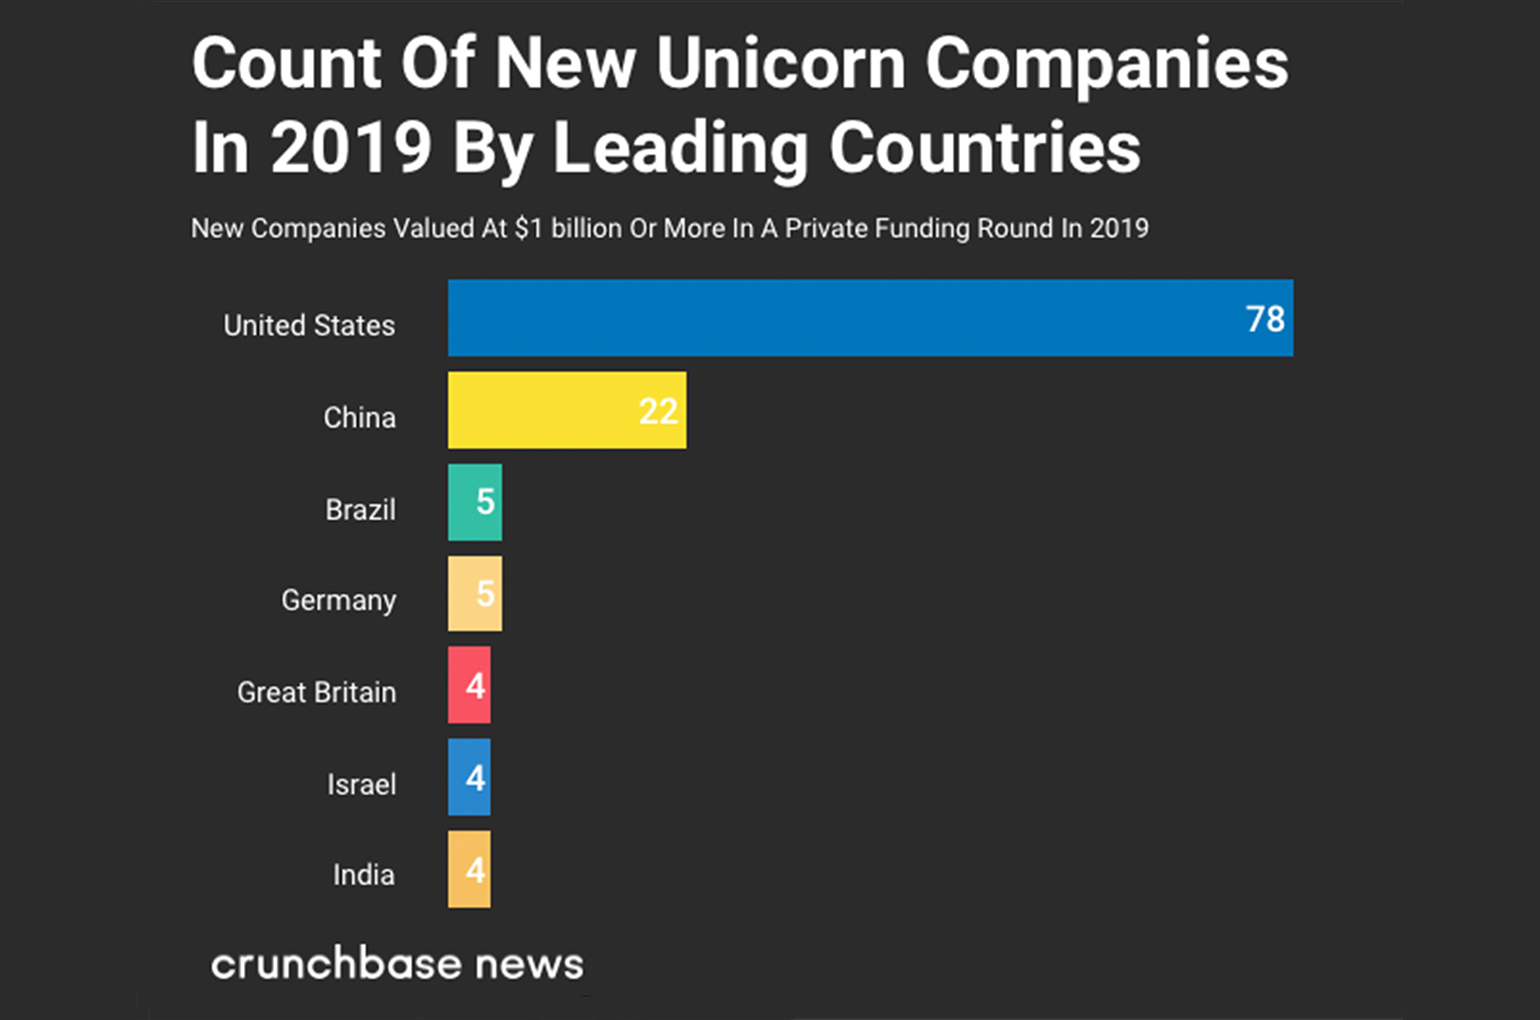 The Growth Of New Unicorns In 2019 Is Higher Than Previous Years-Body Image 017